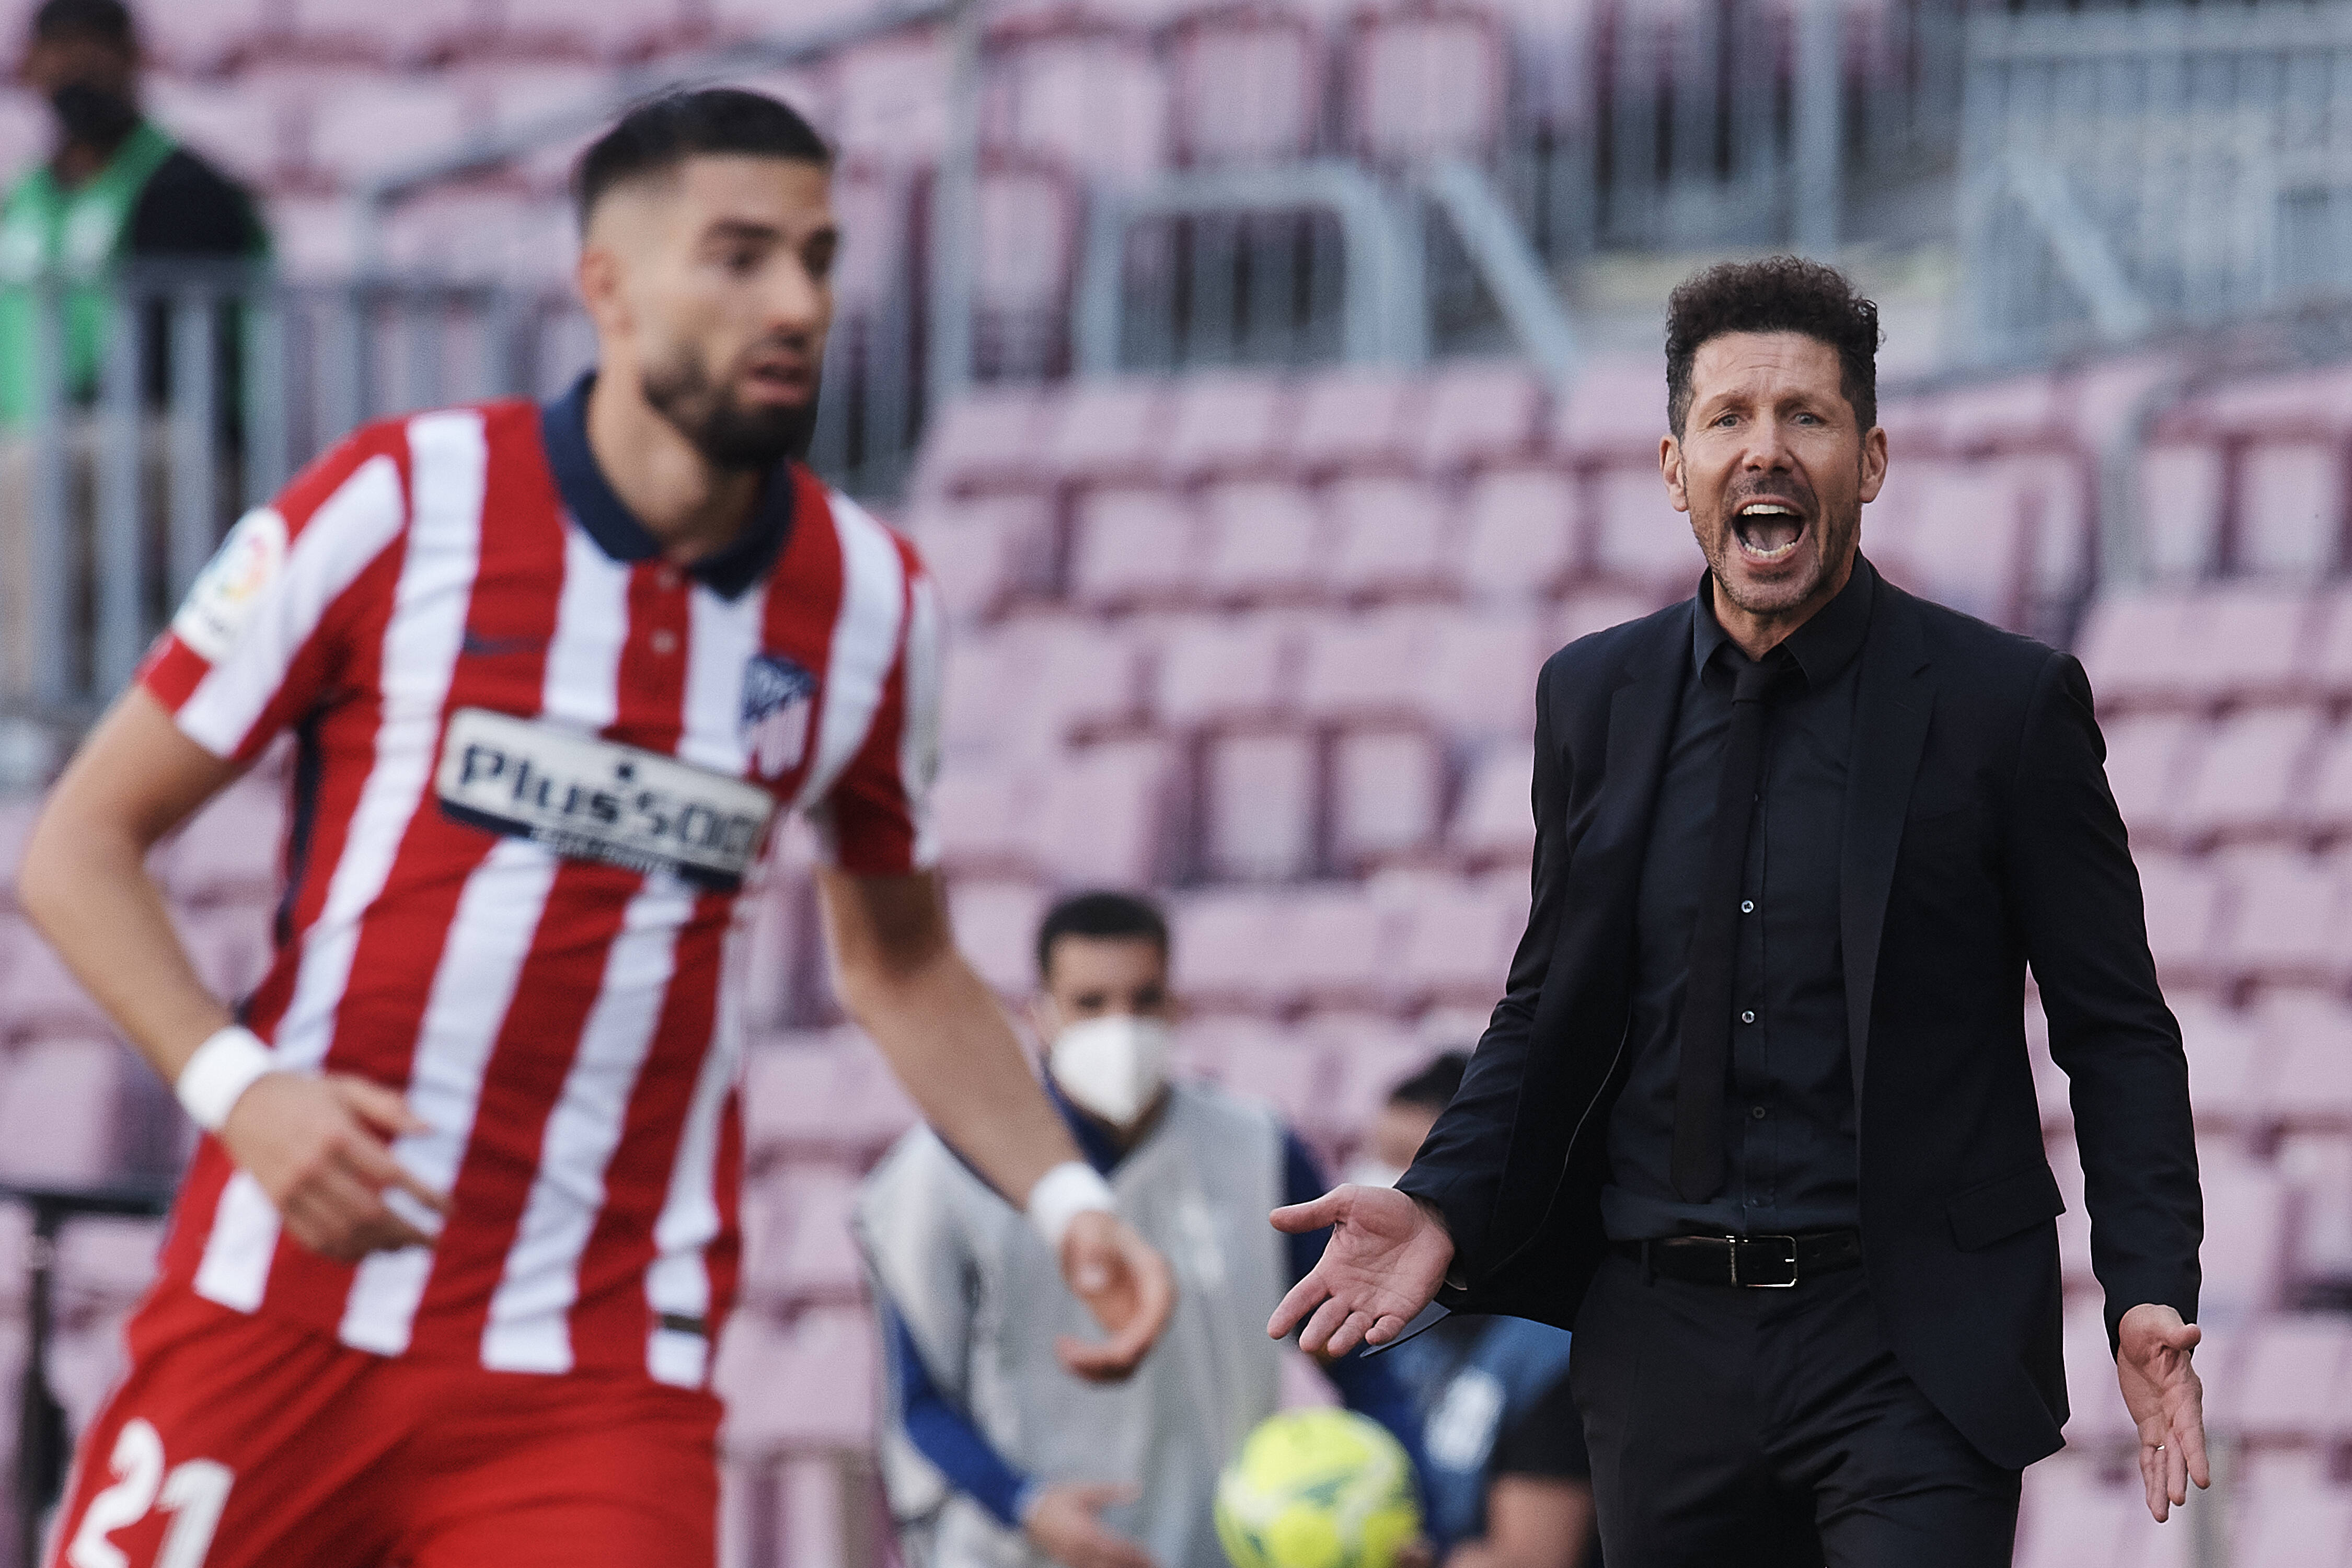 UEFA Champions League Quarterfinal: Atletico Madrid vs Manchester City: Can Diego Simeone and his men break Man City's Champions League dreams? Team News, Live Streaming & more